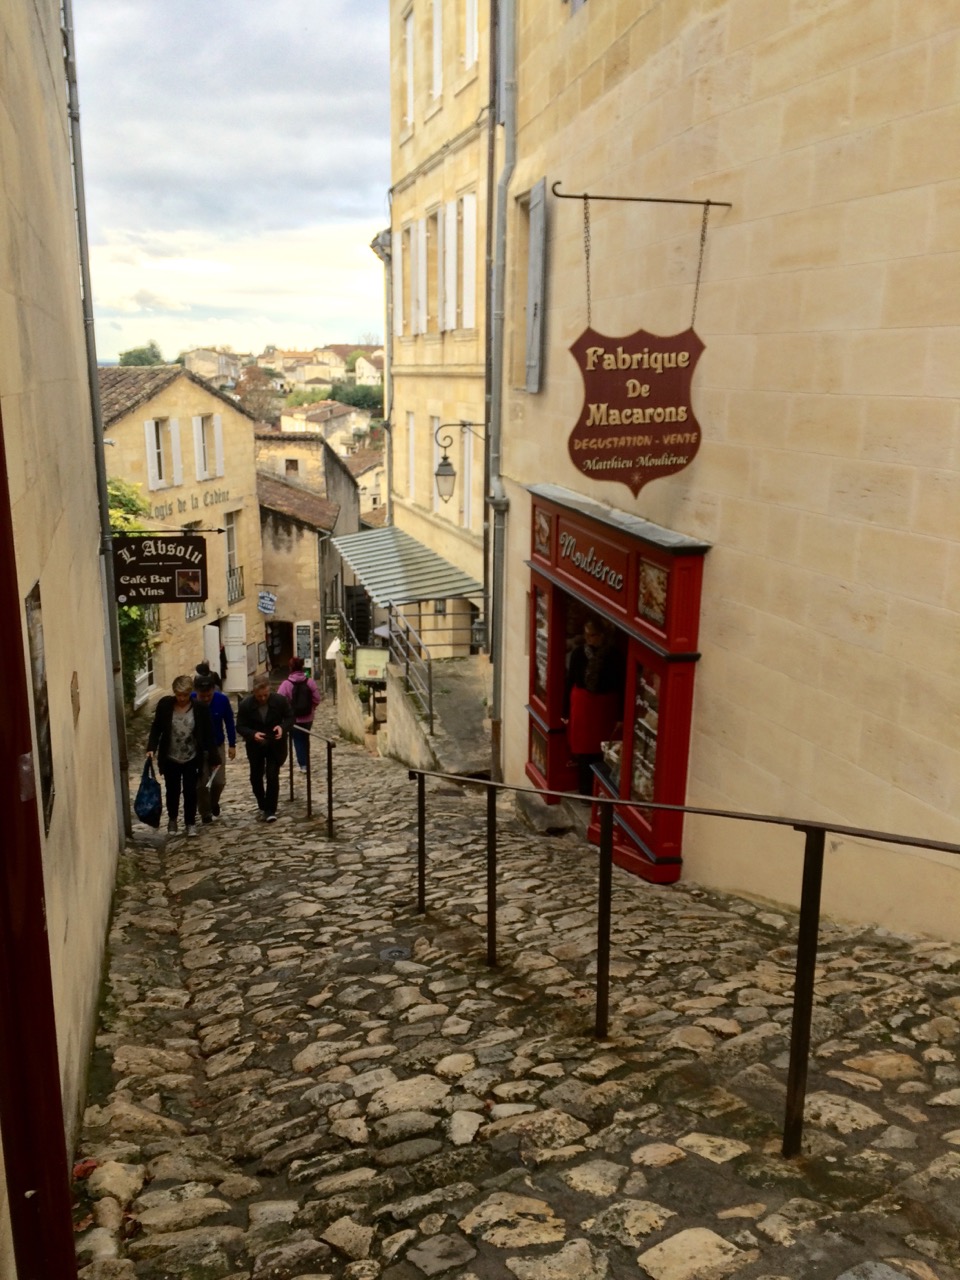 Steep cobblestone streets and ancient shops. Photo by Marla Norman.